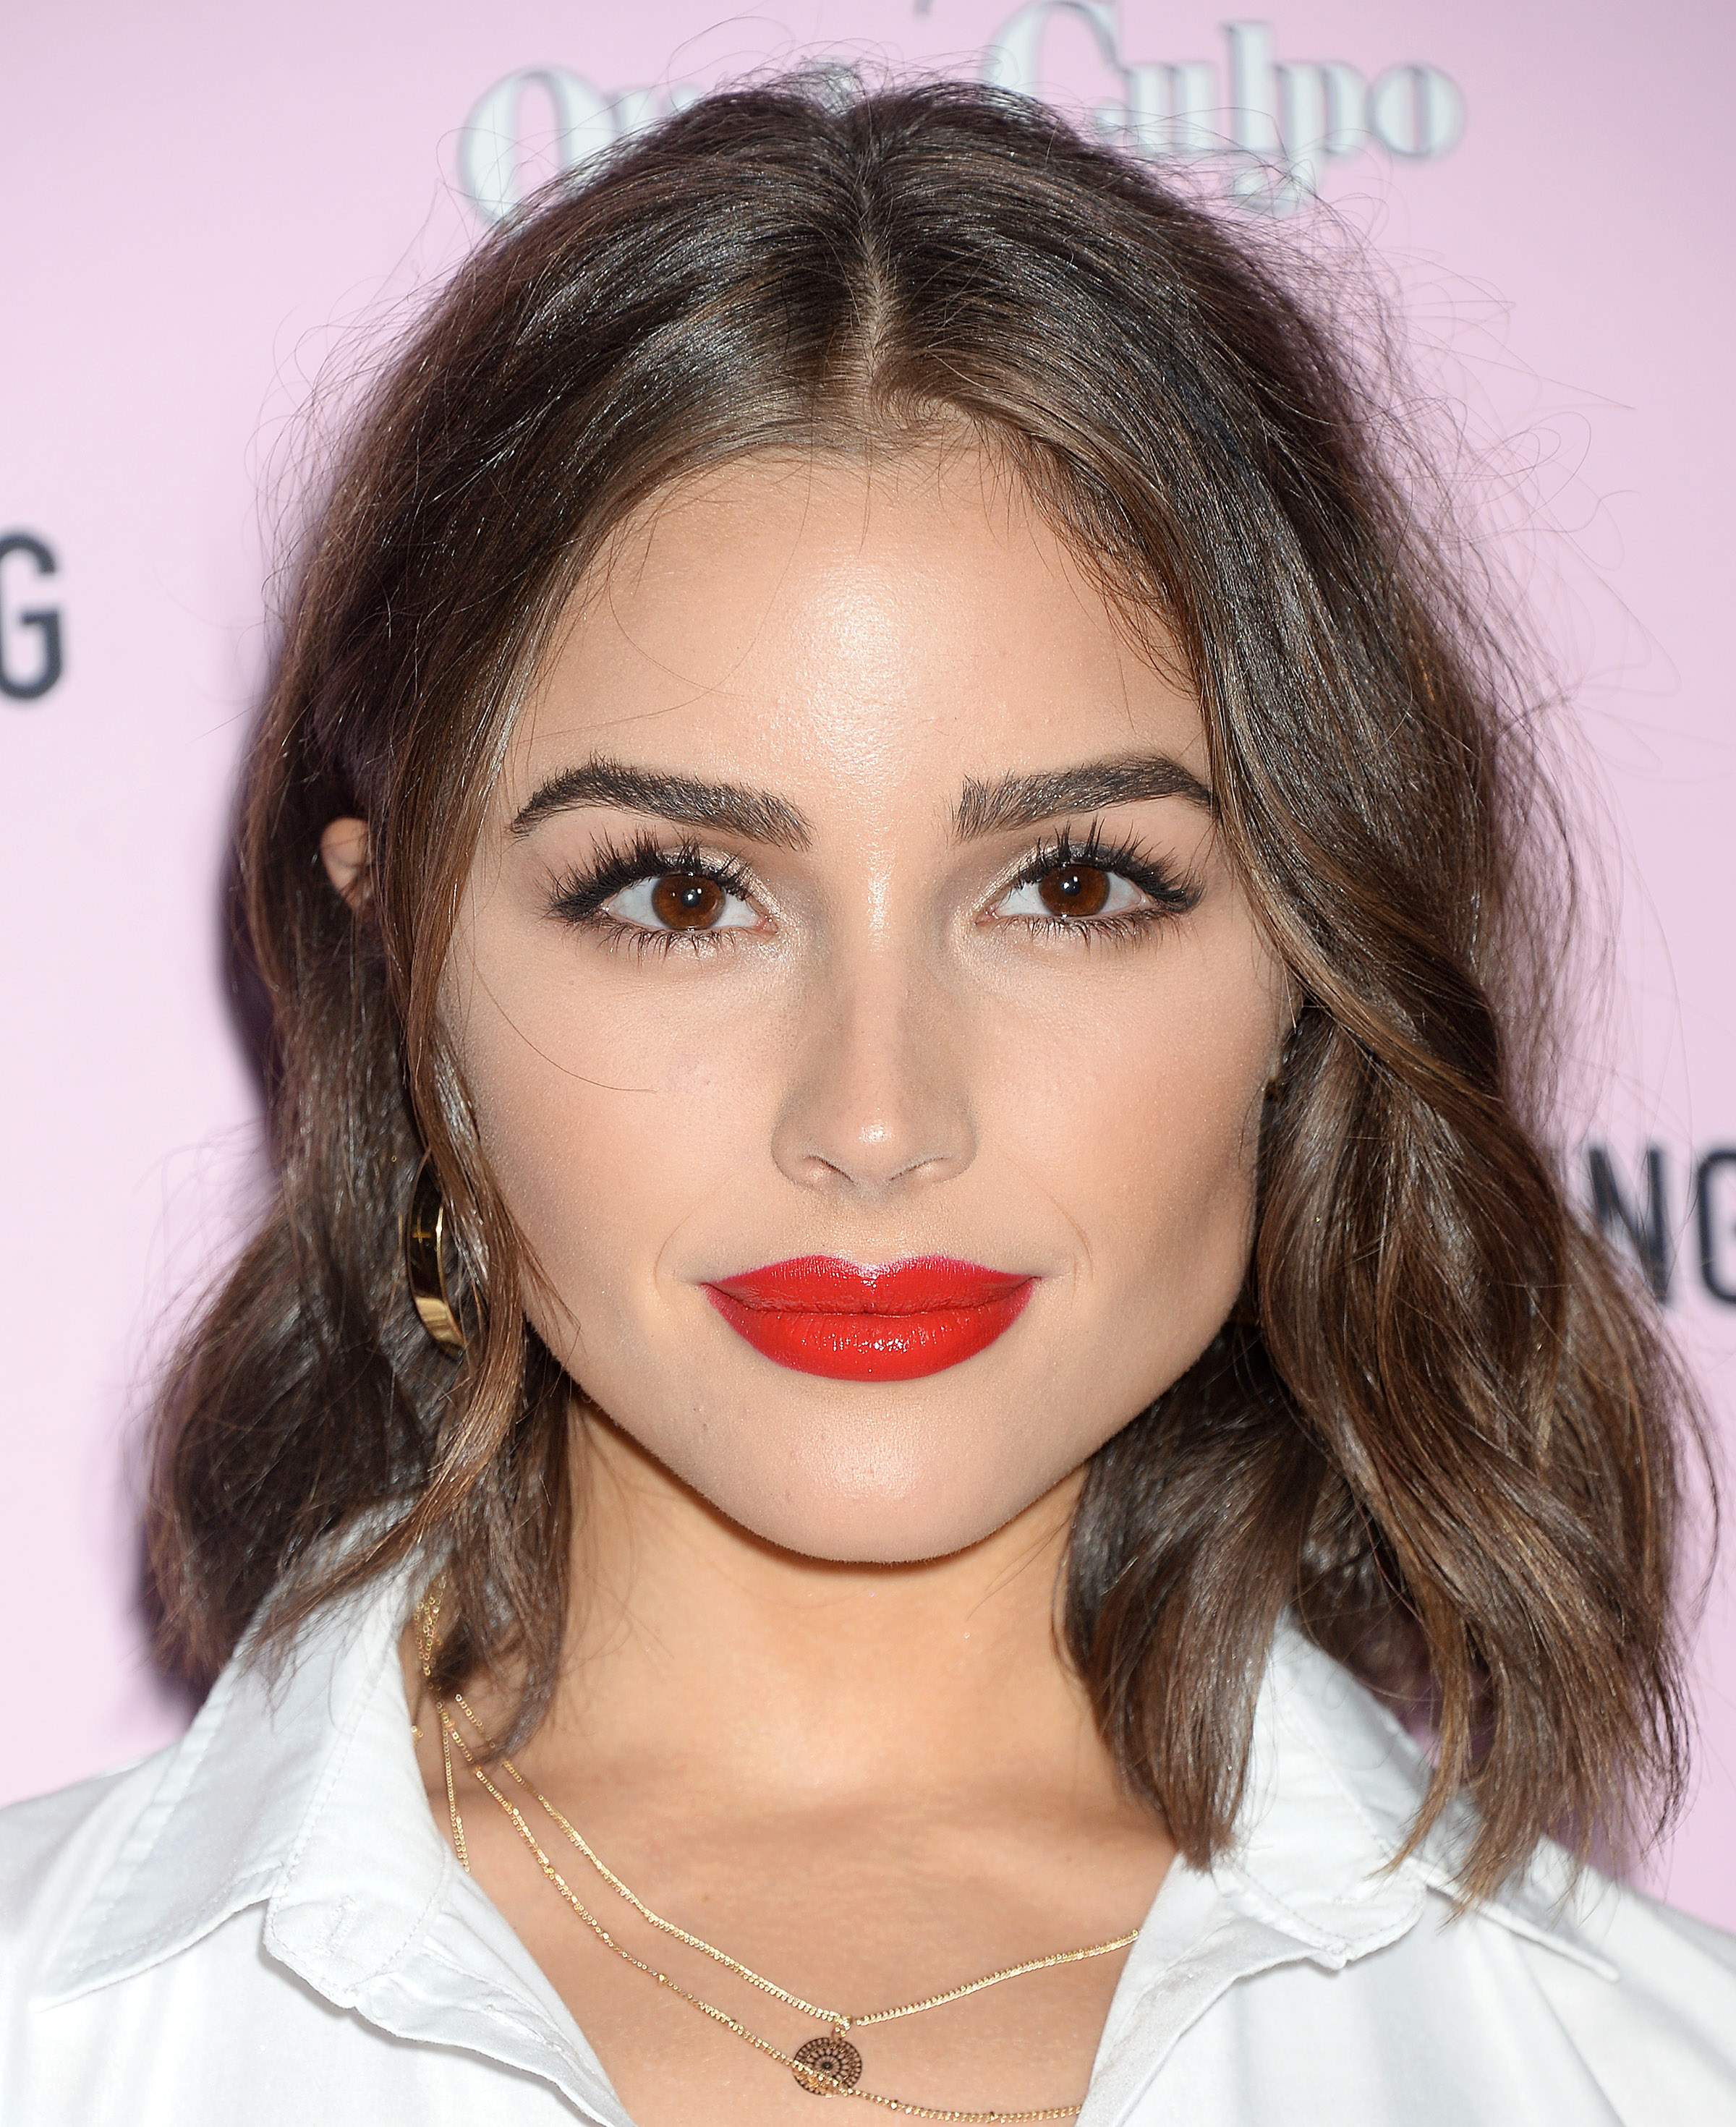 Olivia Culpo attends Pretty Little Things Launch Event